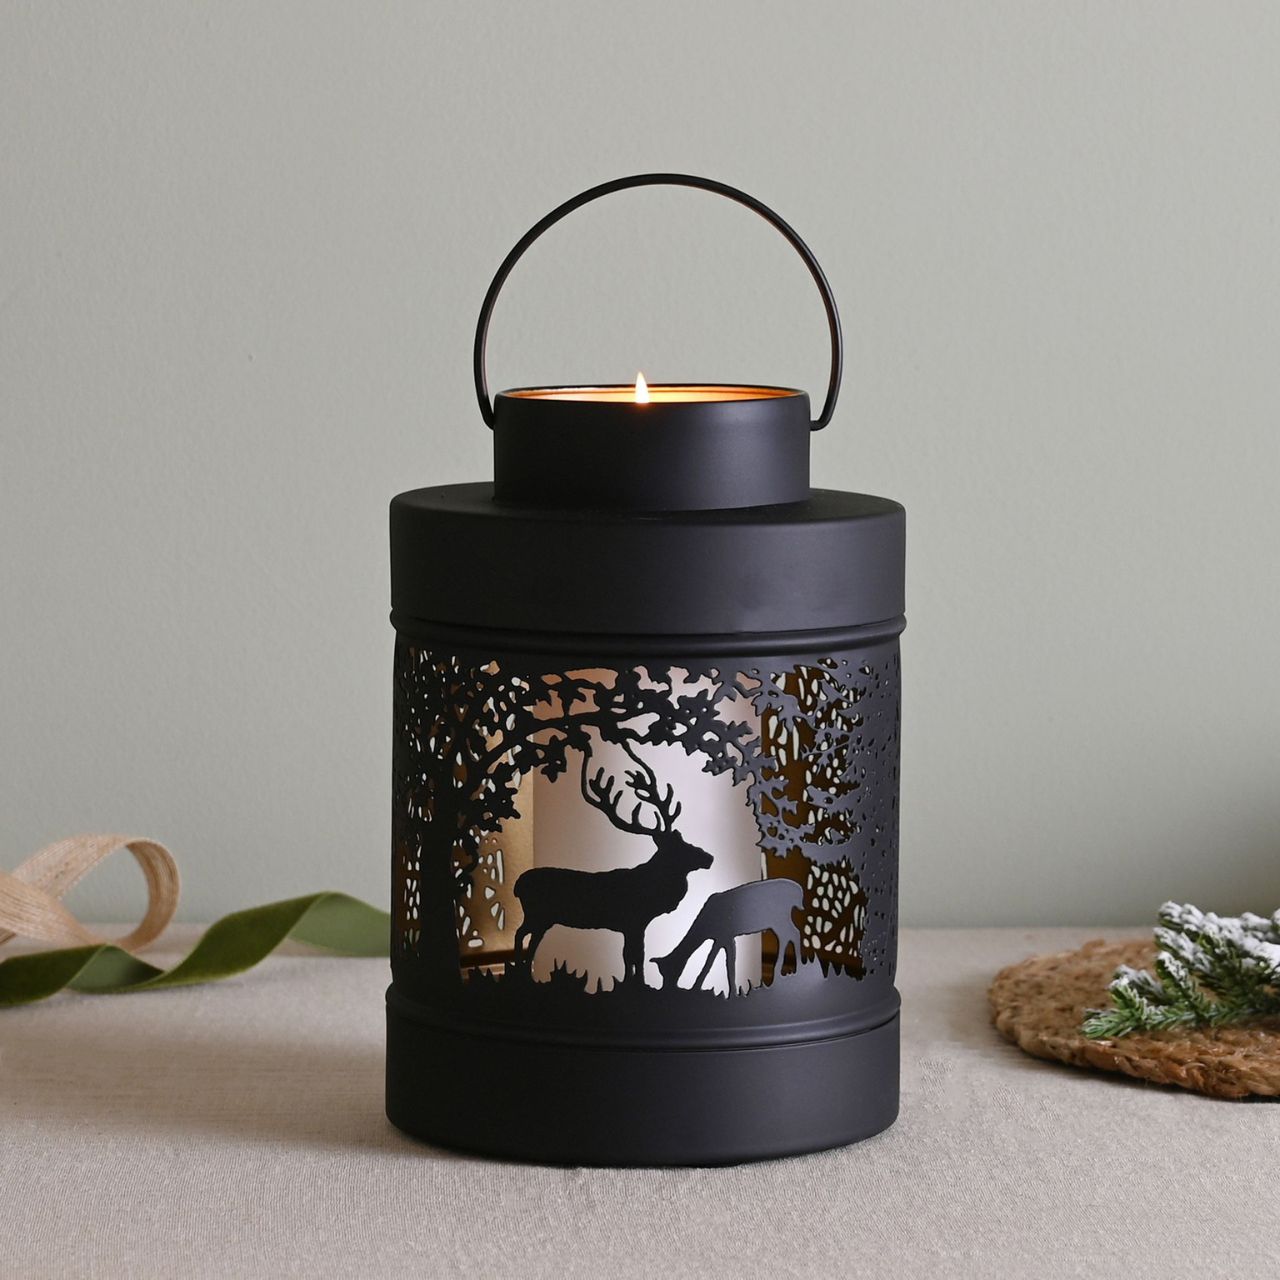 Christmas Black Forest Scene Round Lantern Medium  A medium black forest scene lantern by THE SEASONAL GIFT CO.  This enchanting lantern glistens with festive charm throughout the Christmas period.